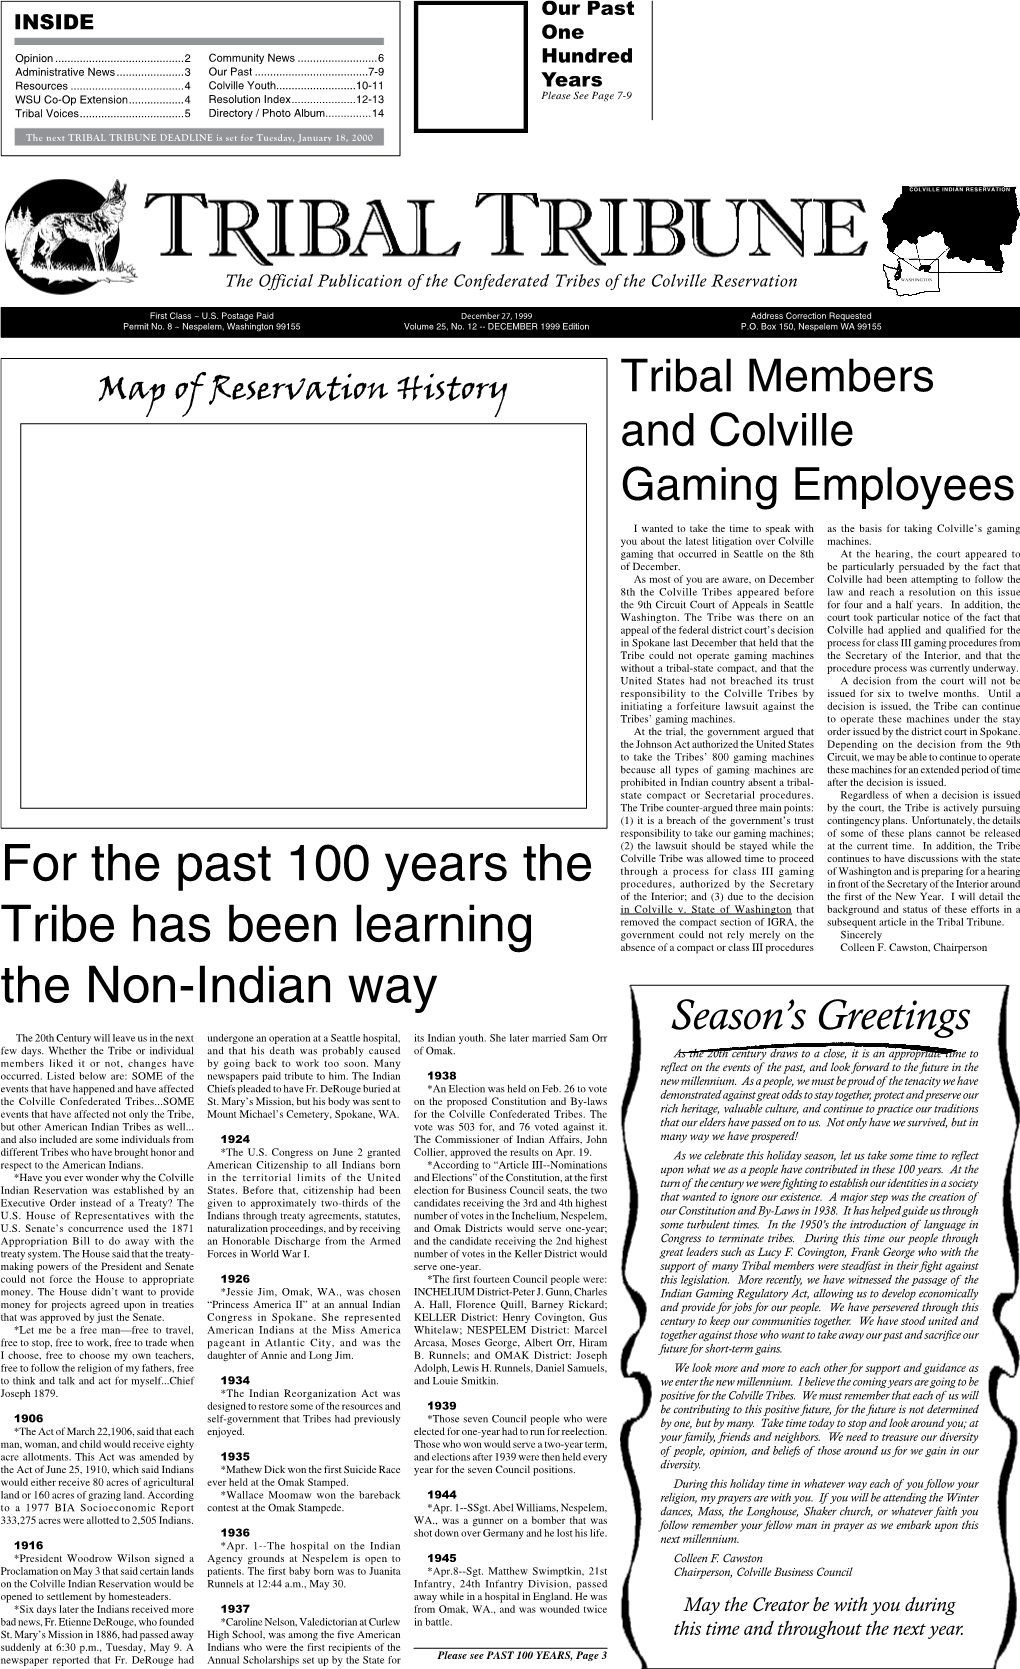 For the Past 100 Years the Tribe Has Been Learning the Non-Indian